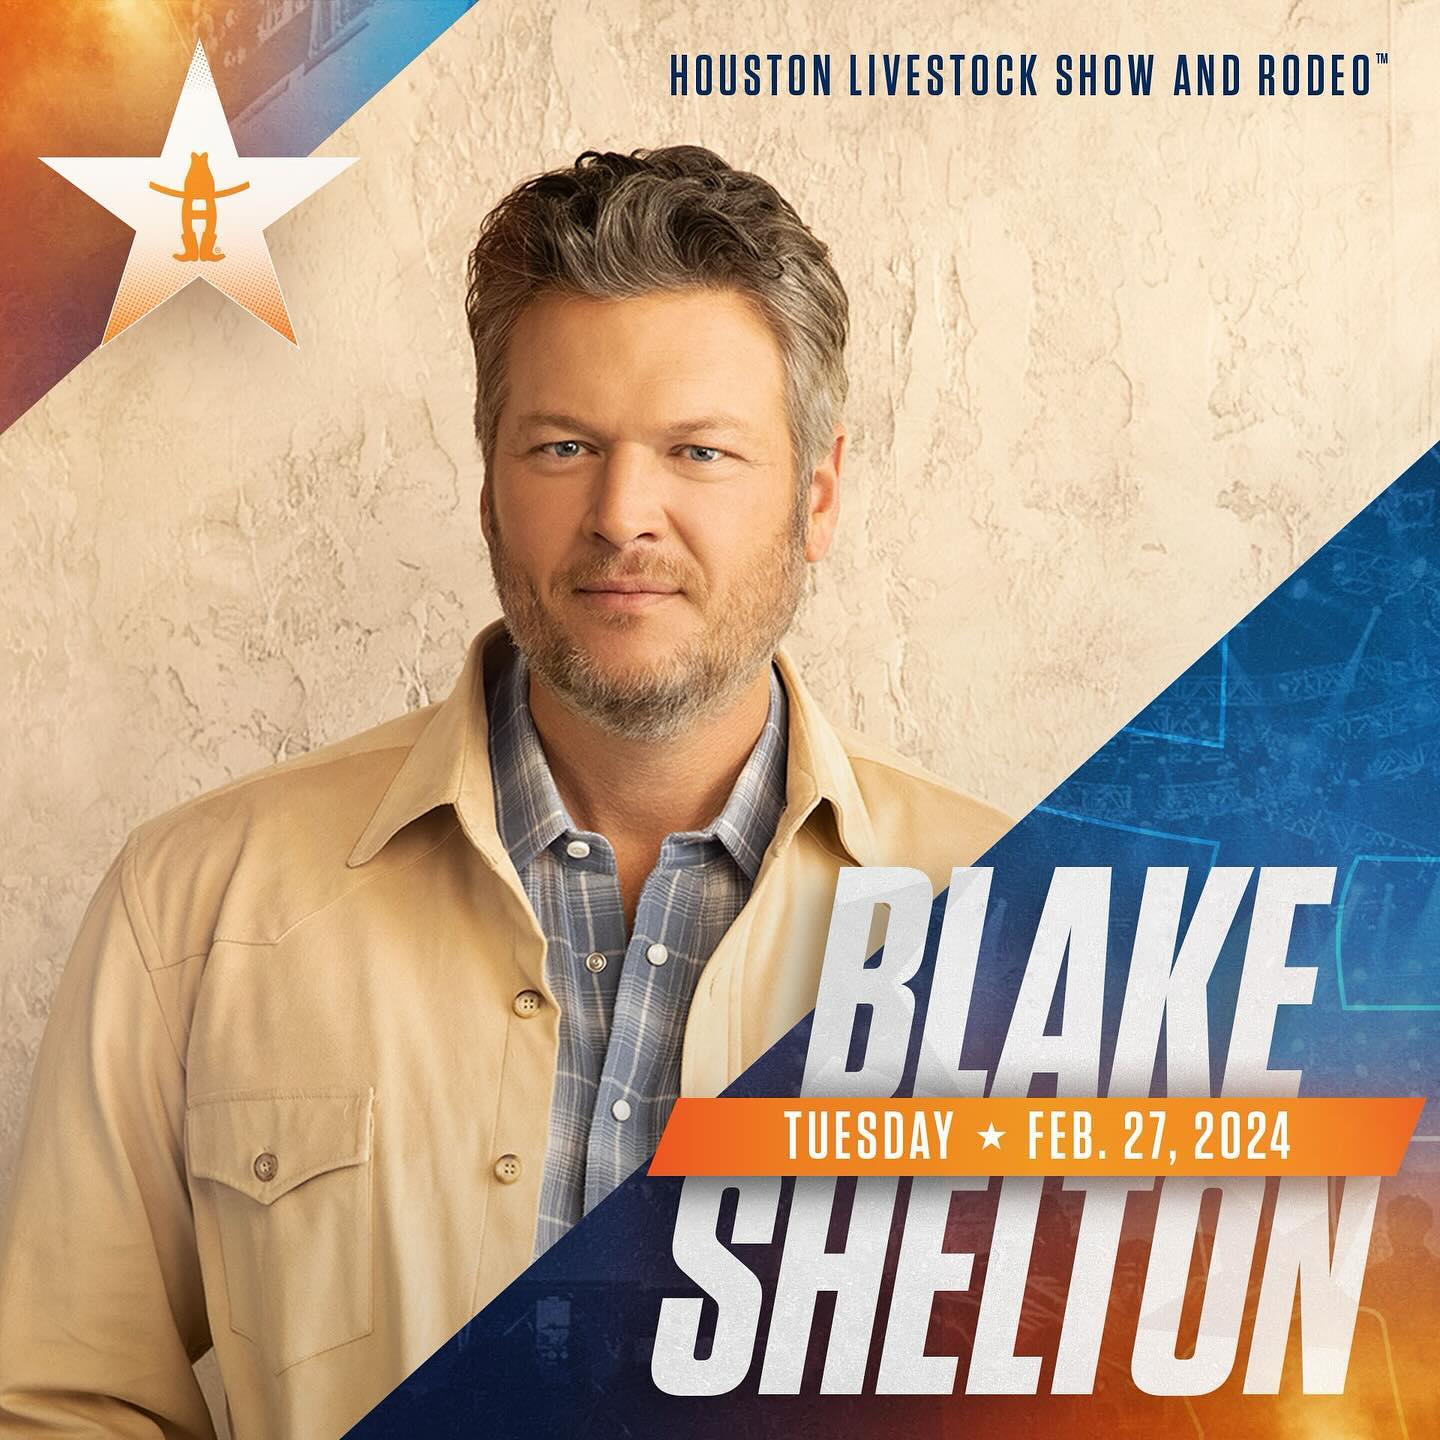 Blake will perform at a rodeo